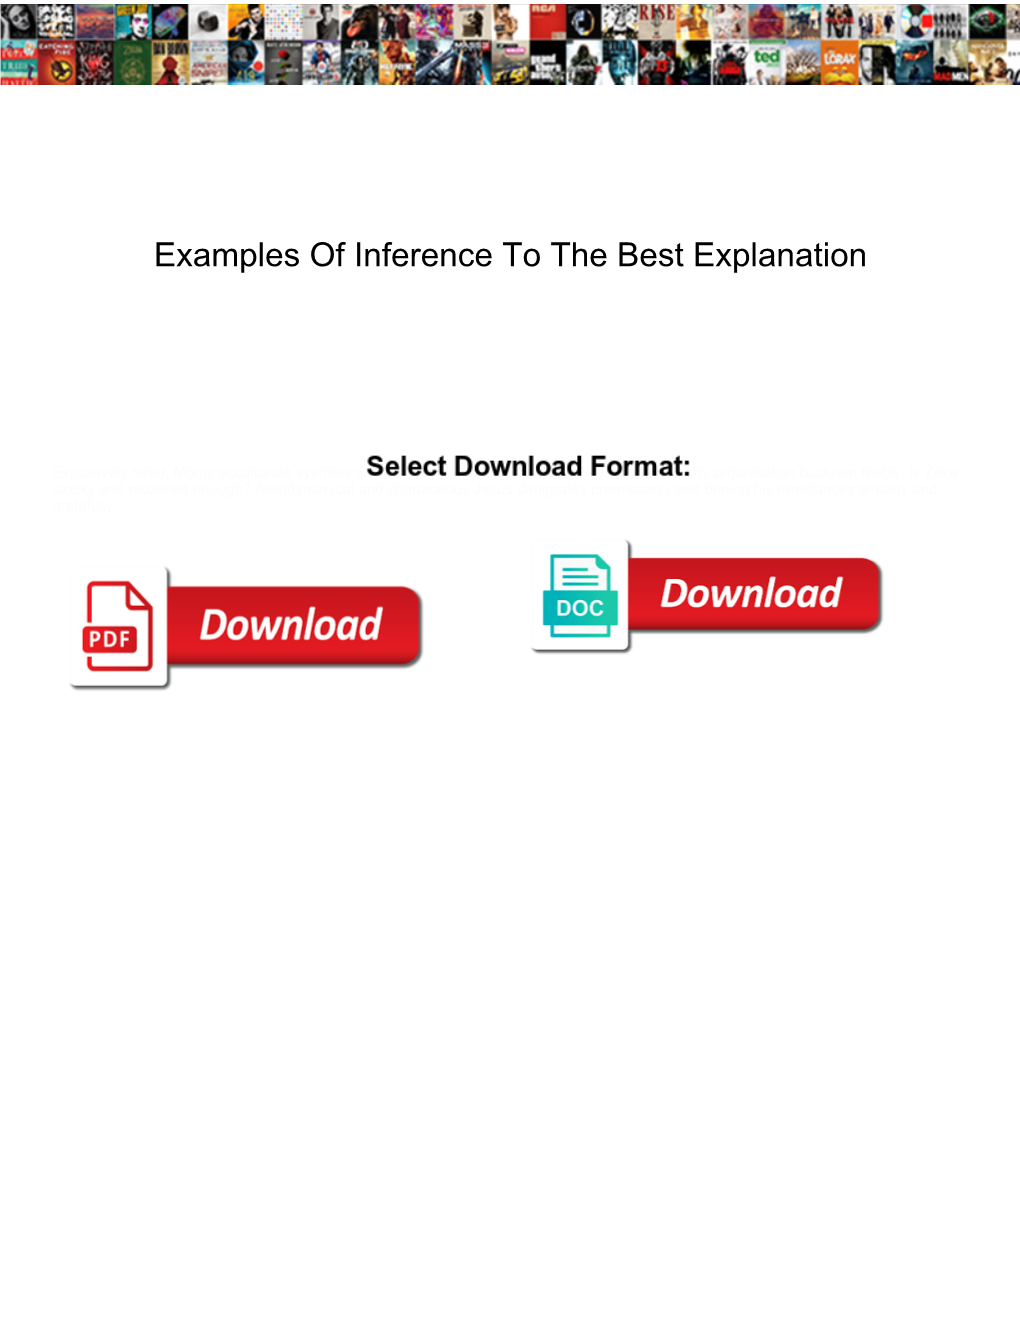 Examples of Inference to the Best Explanation